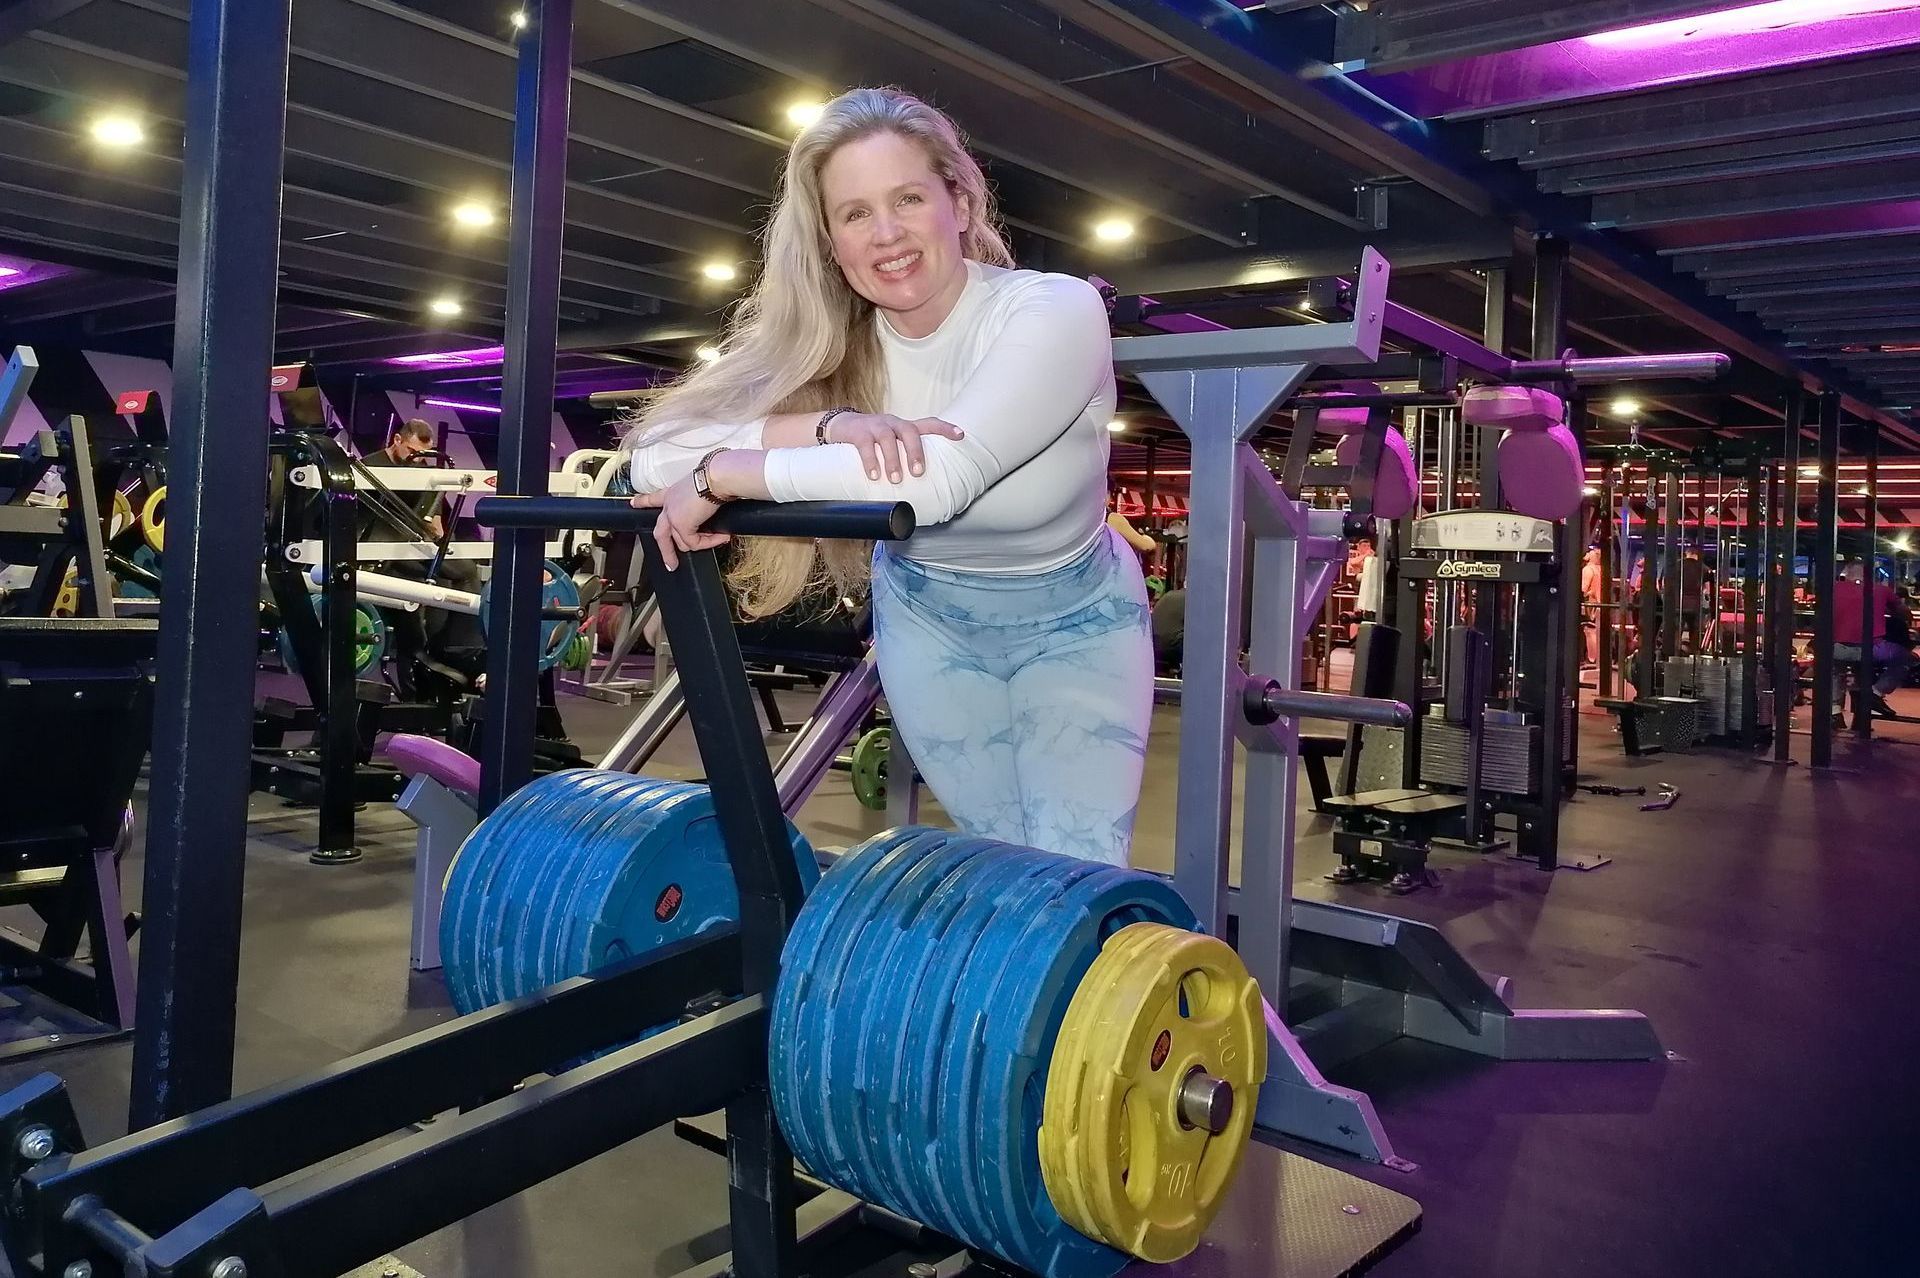 Heaviest squat to parallel in a belted squat machine (female): world record attempt by Kerstin Sellberg